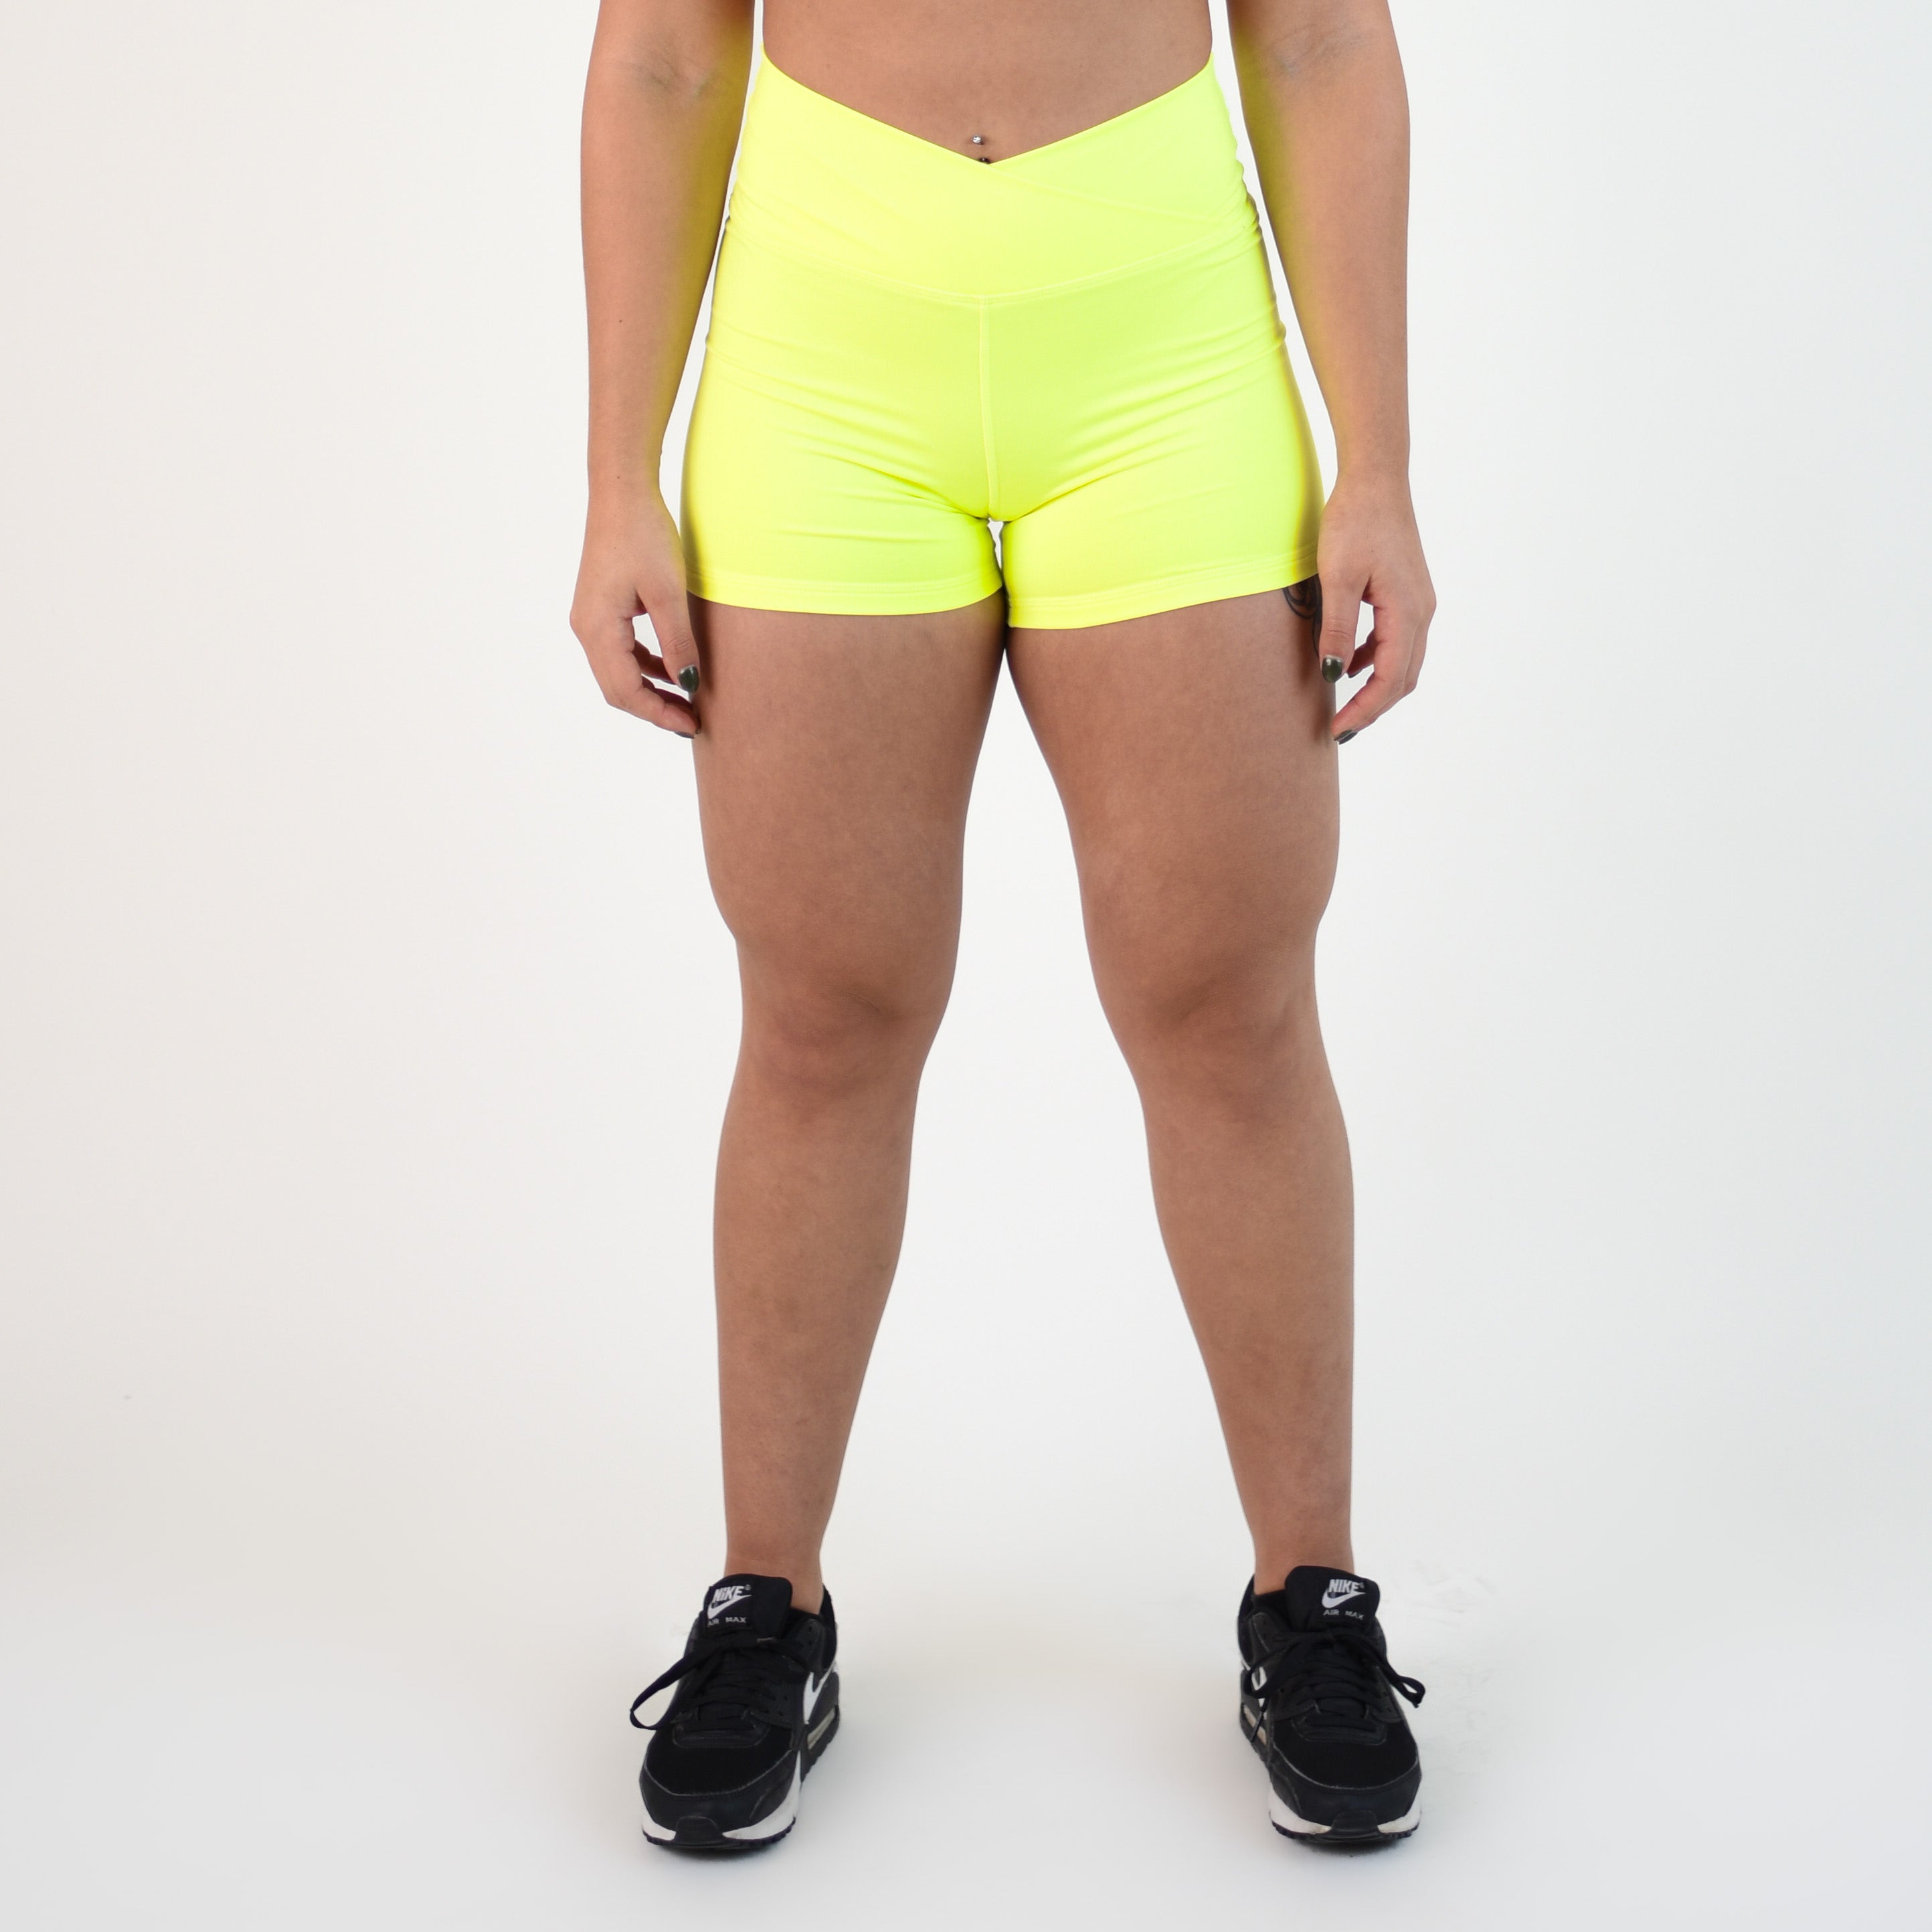 Bright Neon Yellow 2.5 inch Inseam Spandex Compression Shorts - Spandex  Shorts in 2.5 inseam - Lots of Colors & Styles